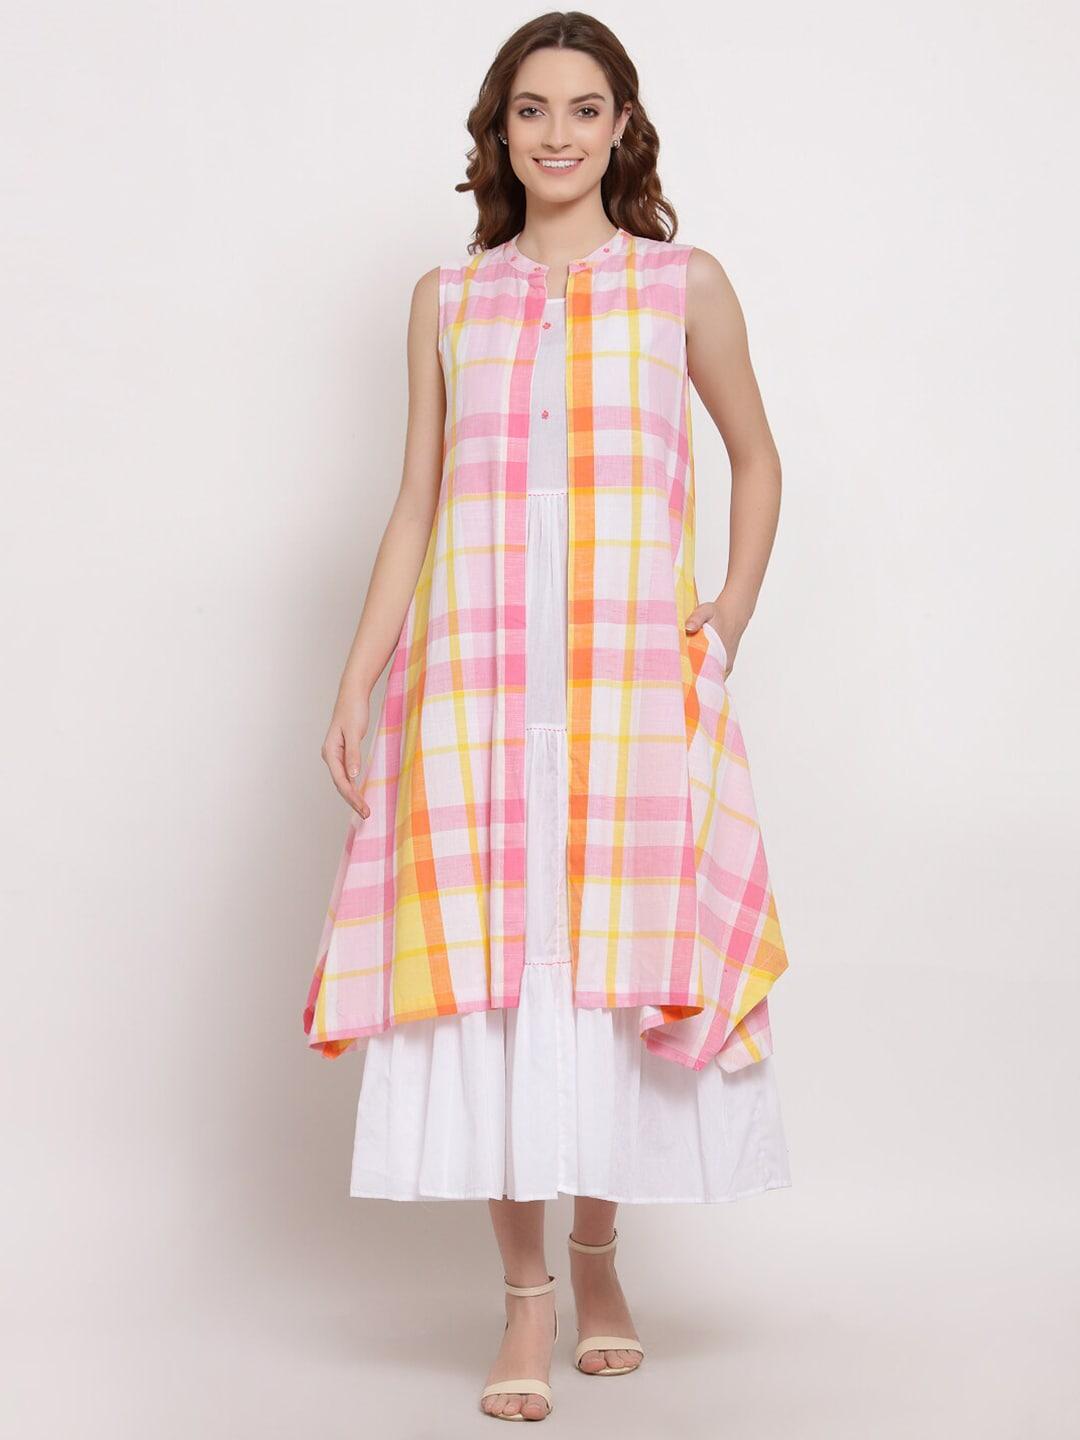 TERQUOIS Pink & White Checked Layered A-Line Midi Dress